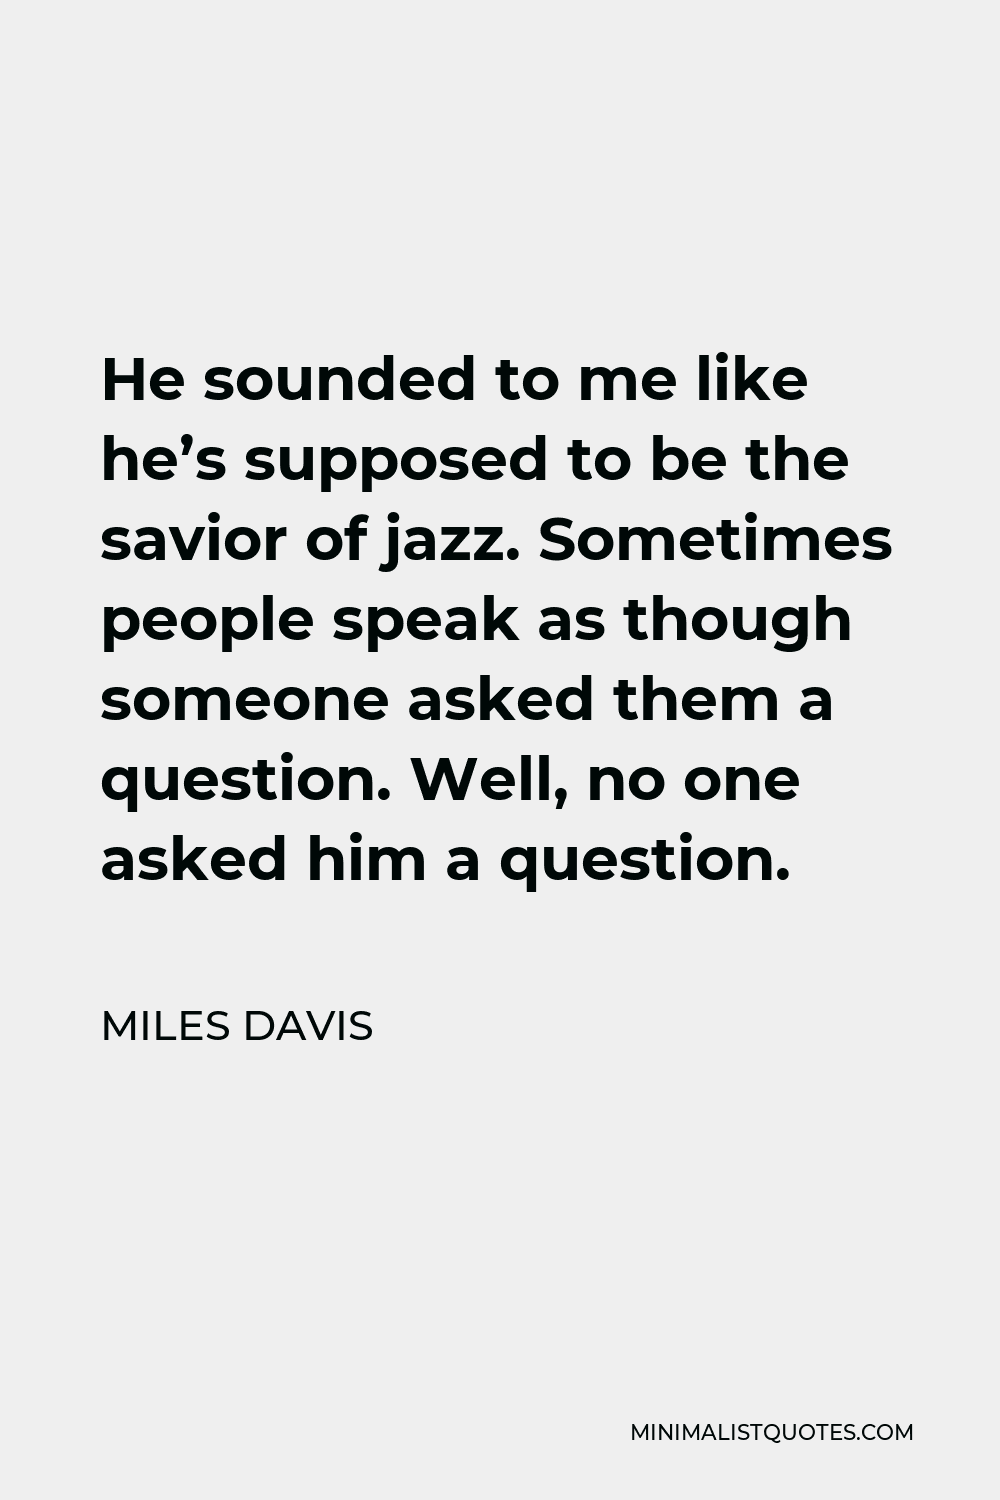 Miles Davis Quote - He sounded to me like he’s supposed to be the savior of jazz. Sometimes people speak as though someone asked them a question. Well, no one asked him a question.